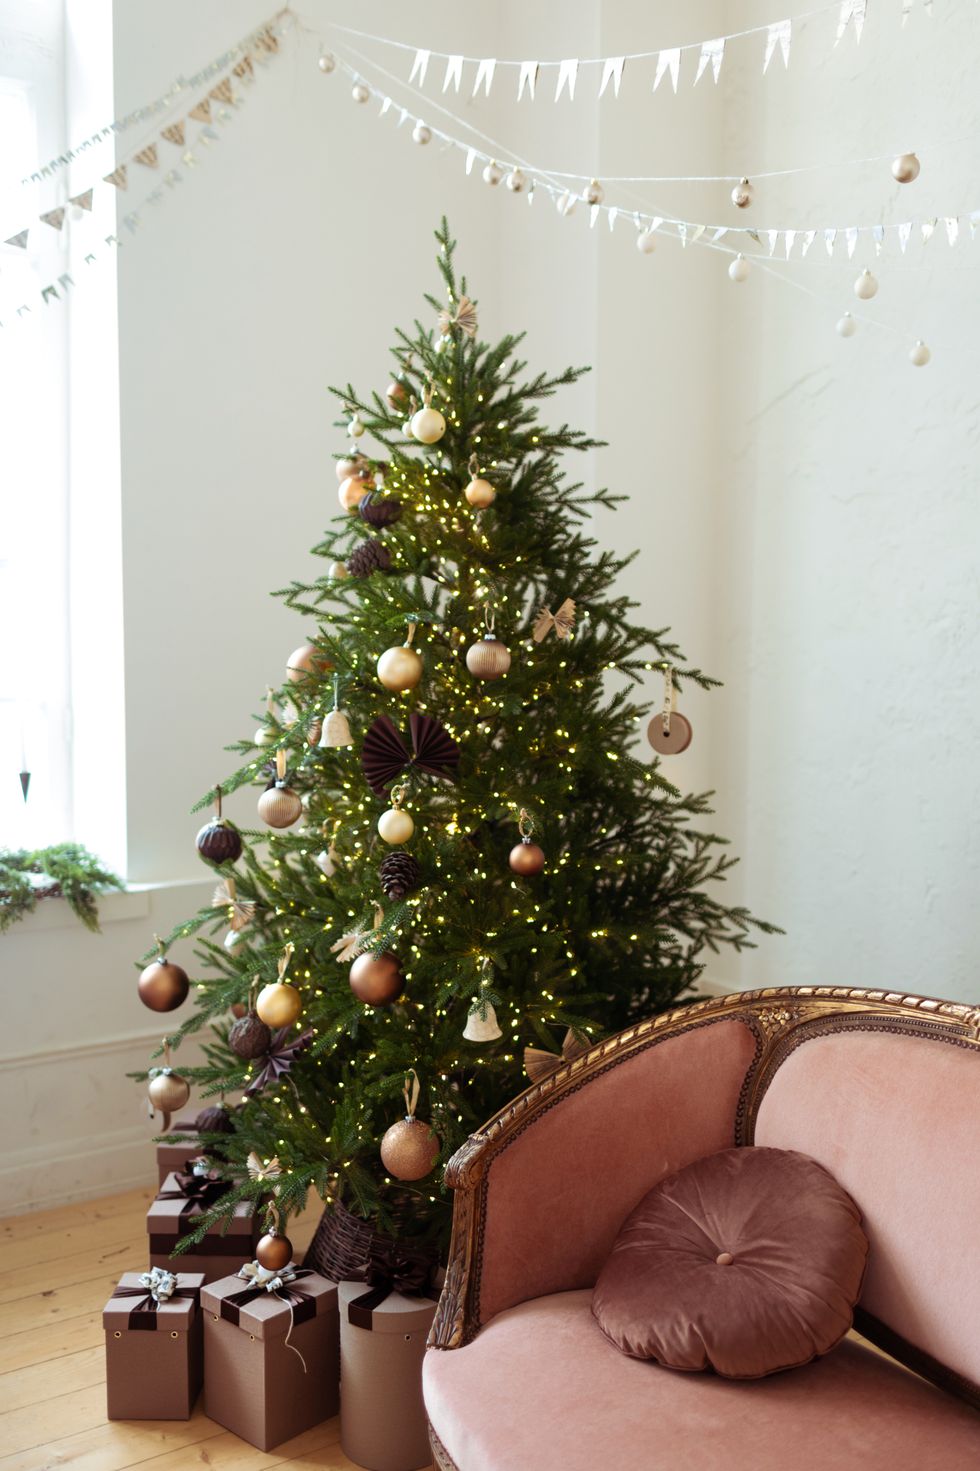 Eclectic Christmas Tree Ideas For a Unexpected, Unique Look